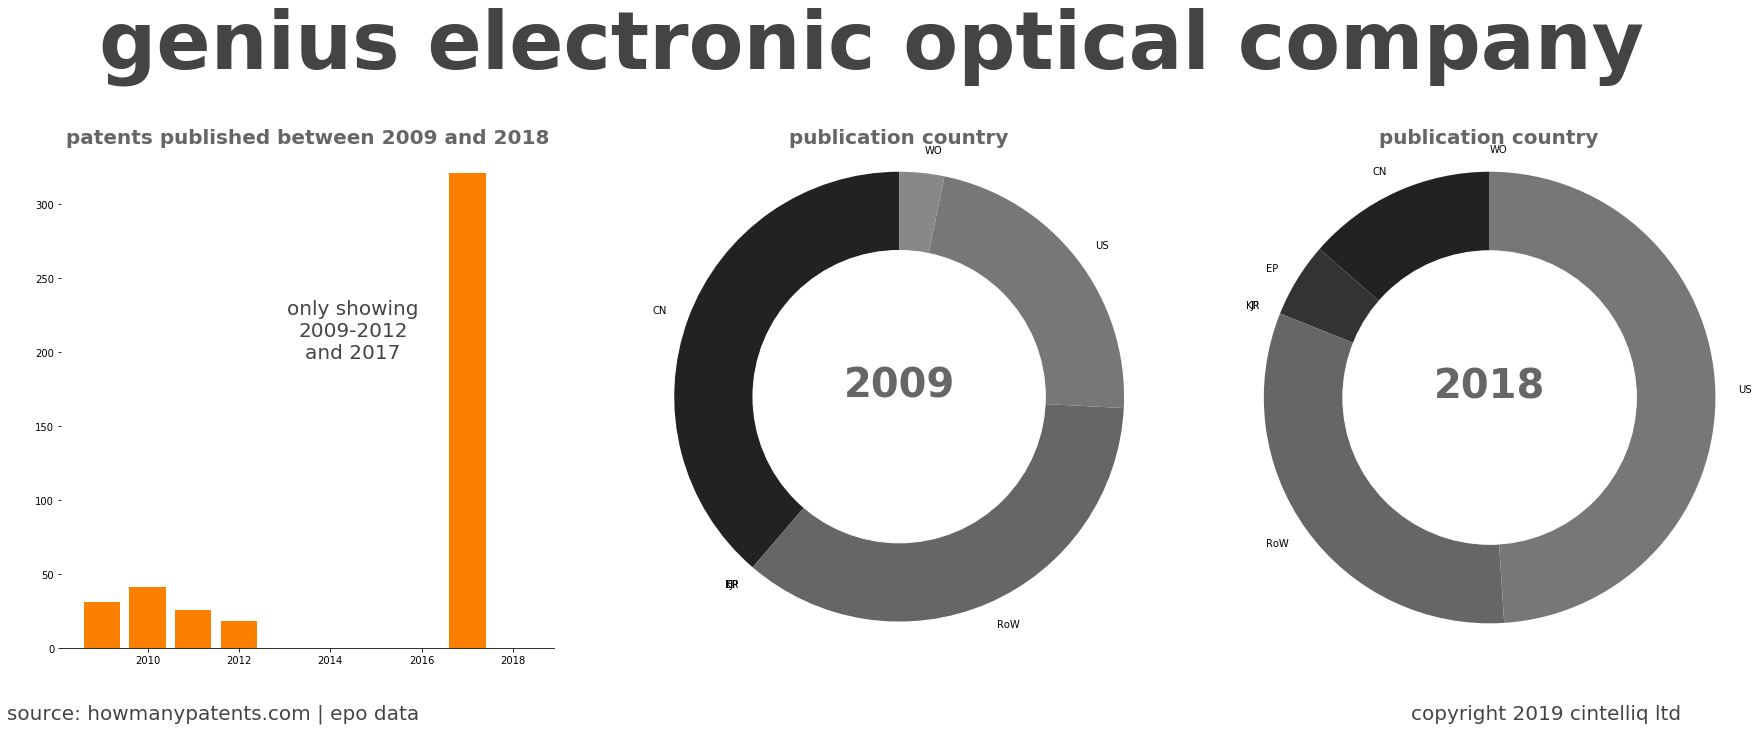 summary of patents for Genius Electronic Optical Company